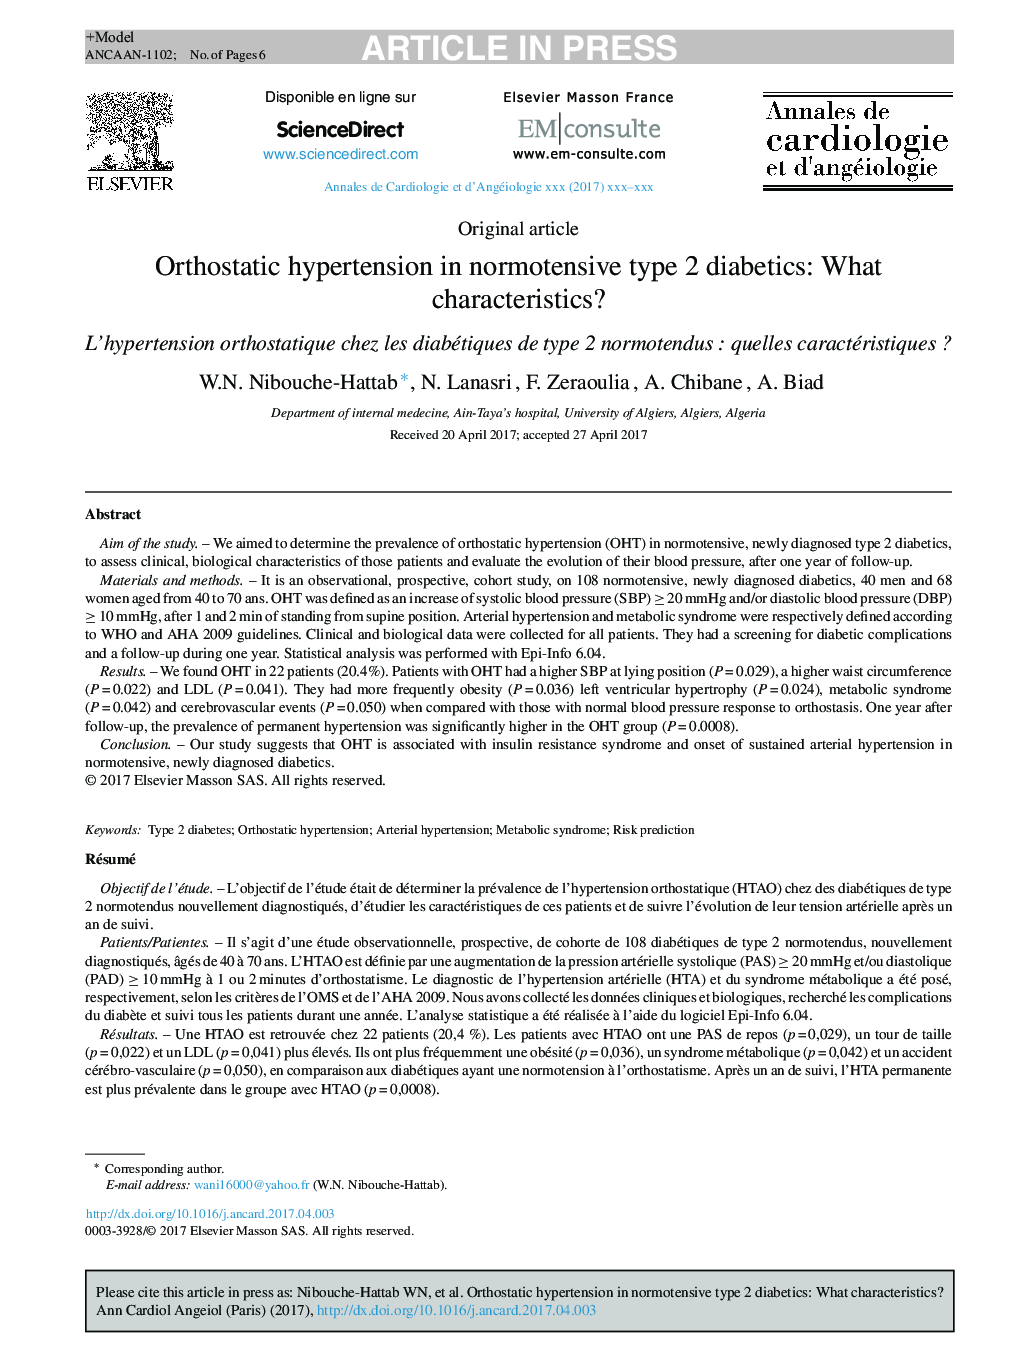 Orthostatic hypertension in normotensive type 2 diabetics: What characteristics?